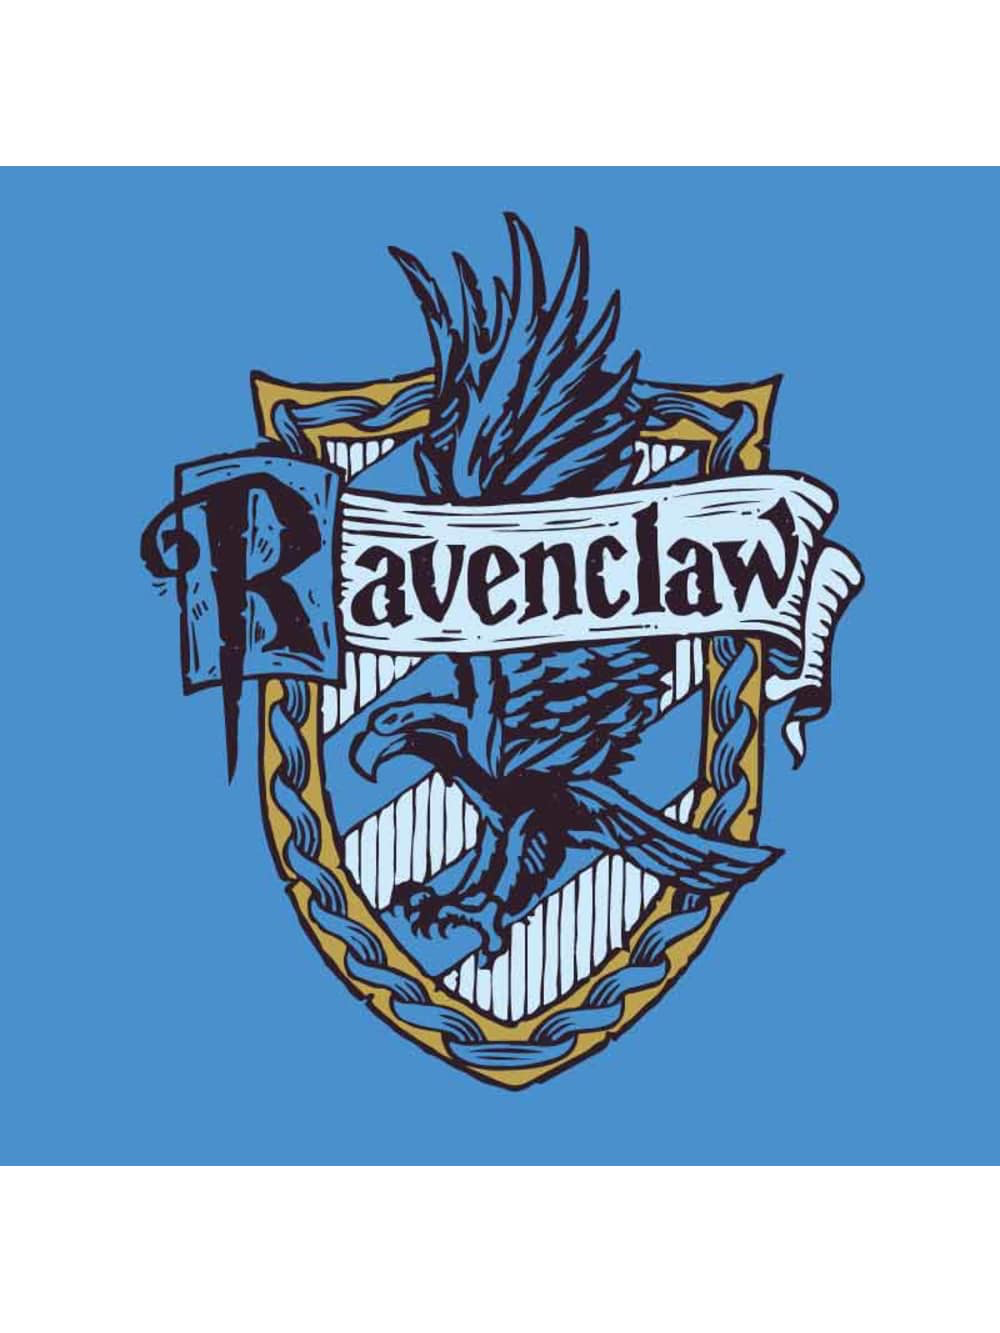 Ravenclaw, Potter Dictionary Wiki